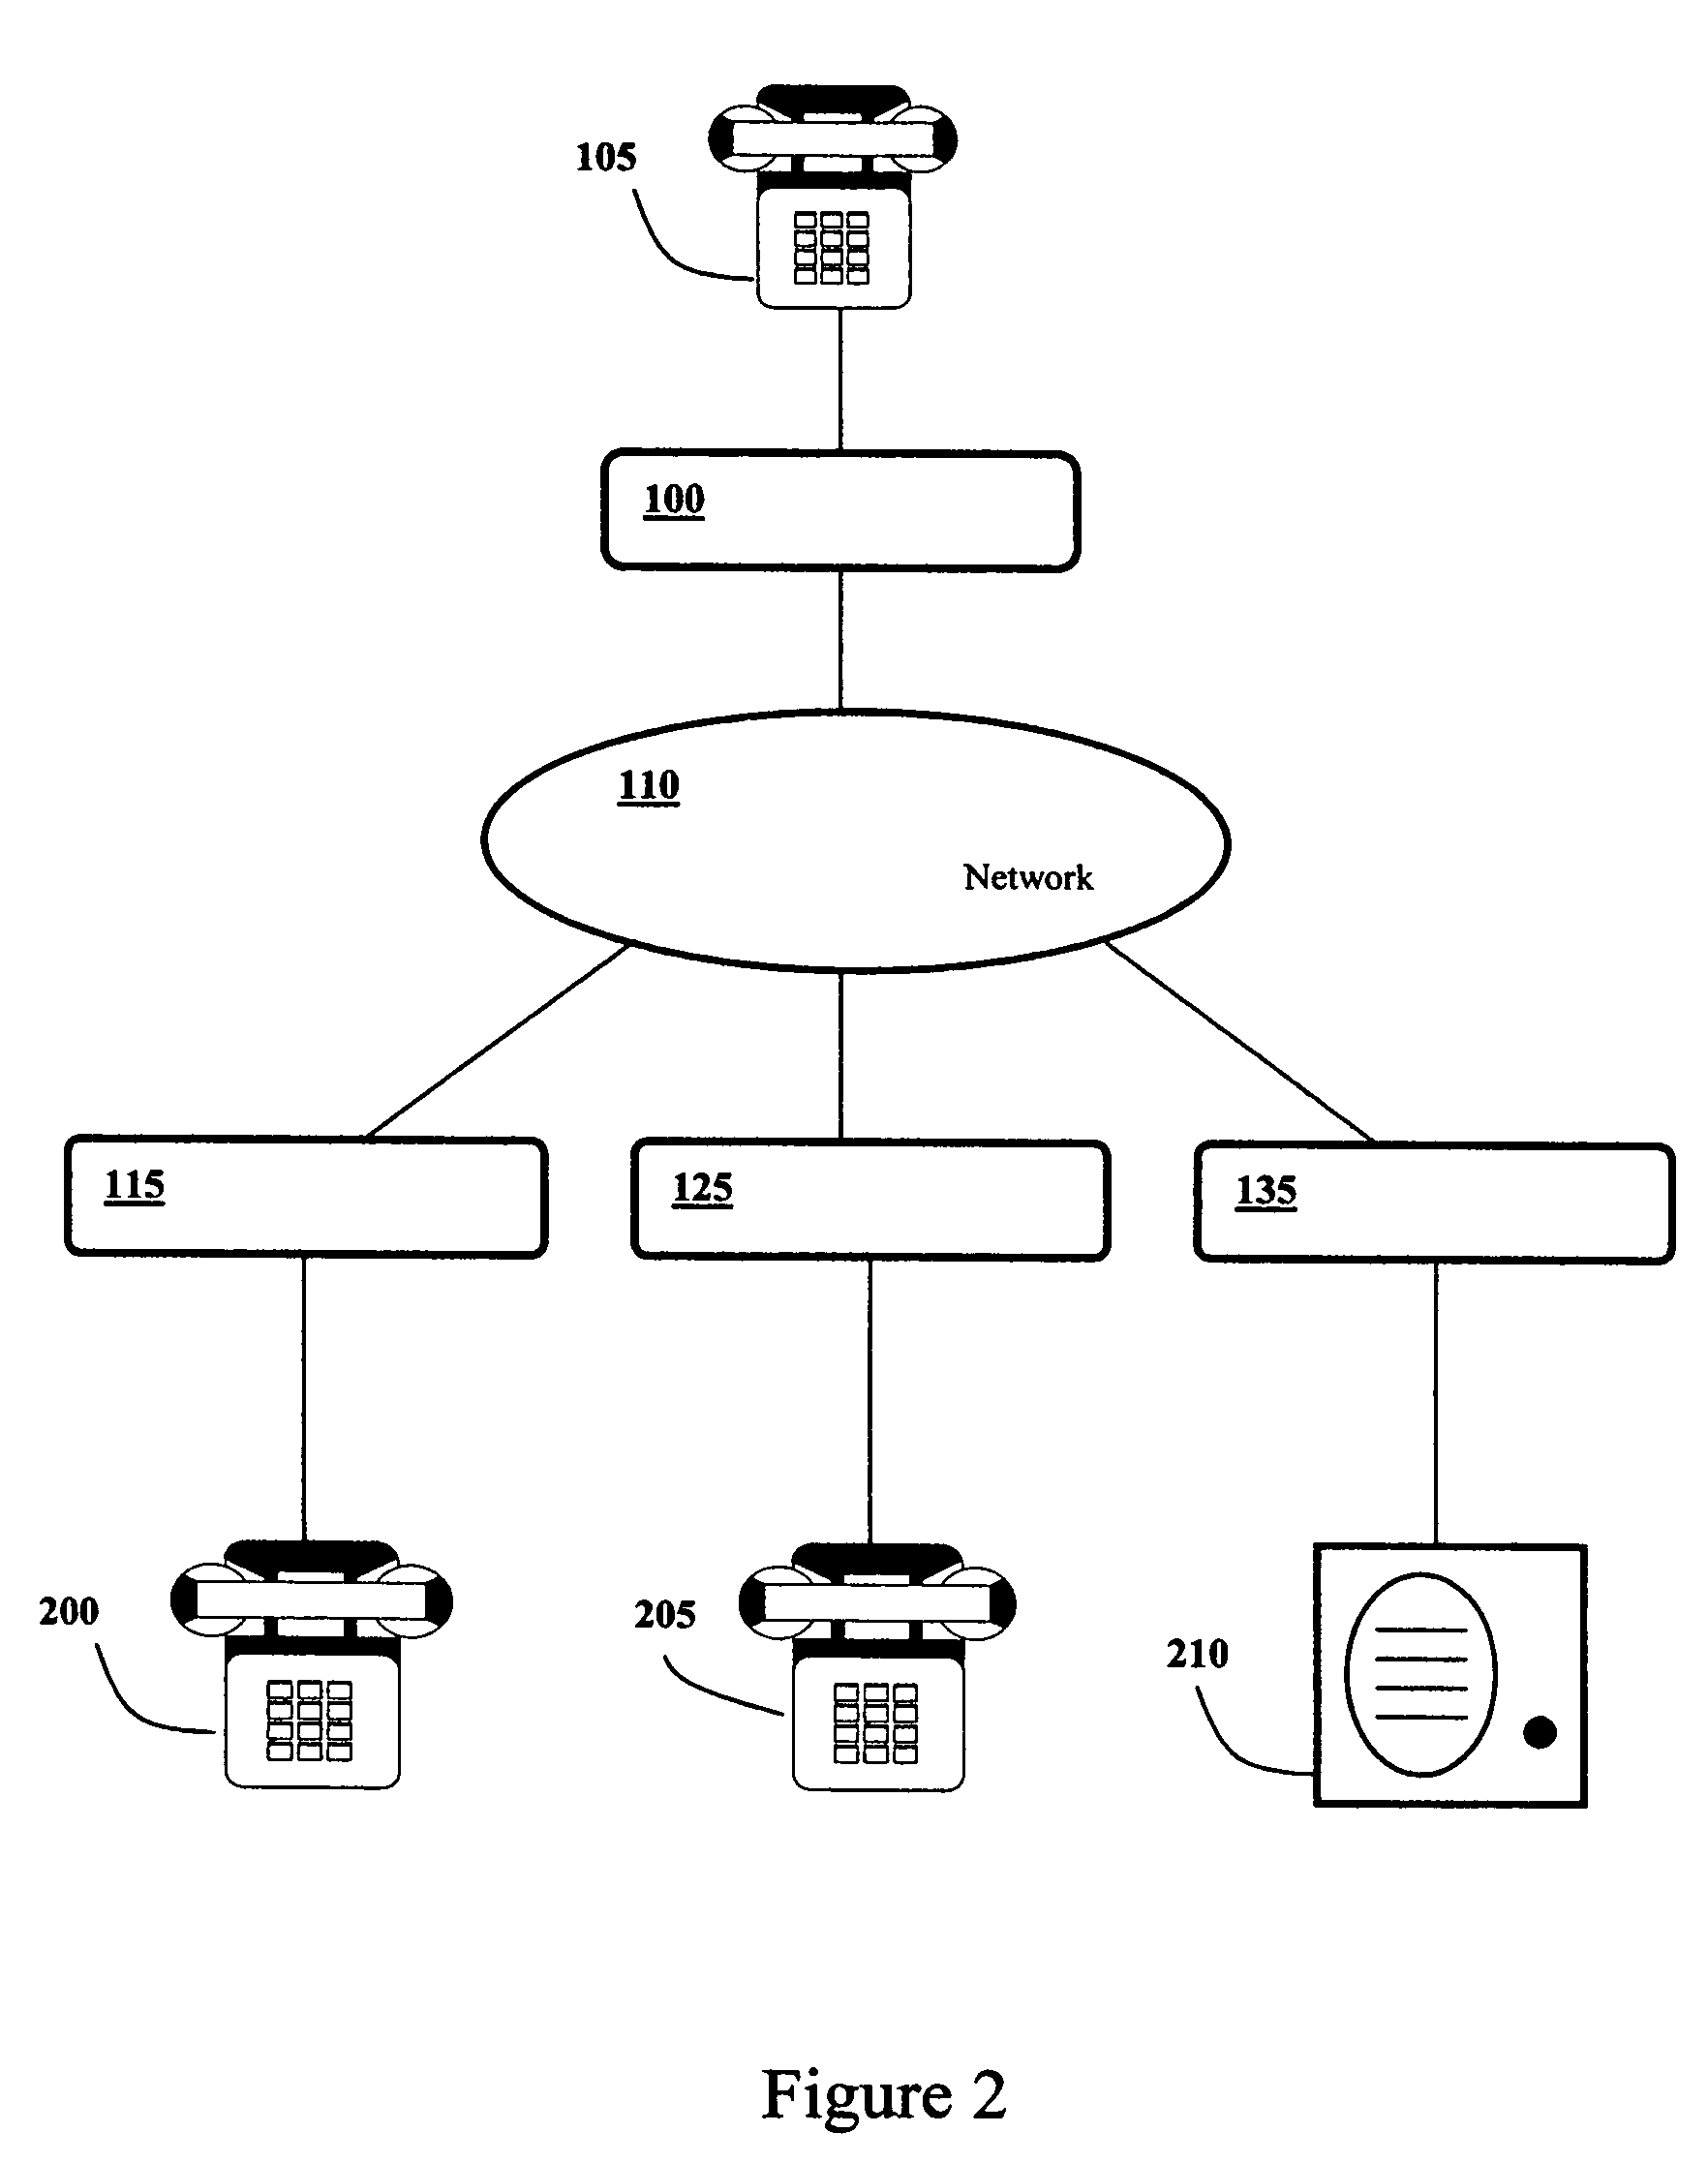 Communication system with distributed intelligence